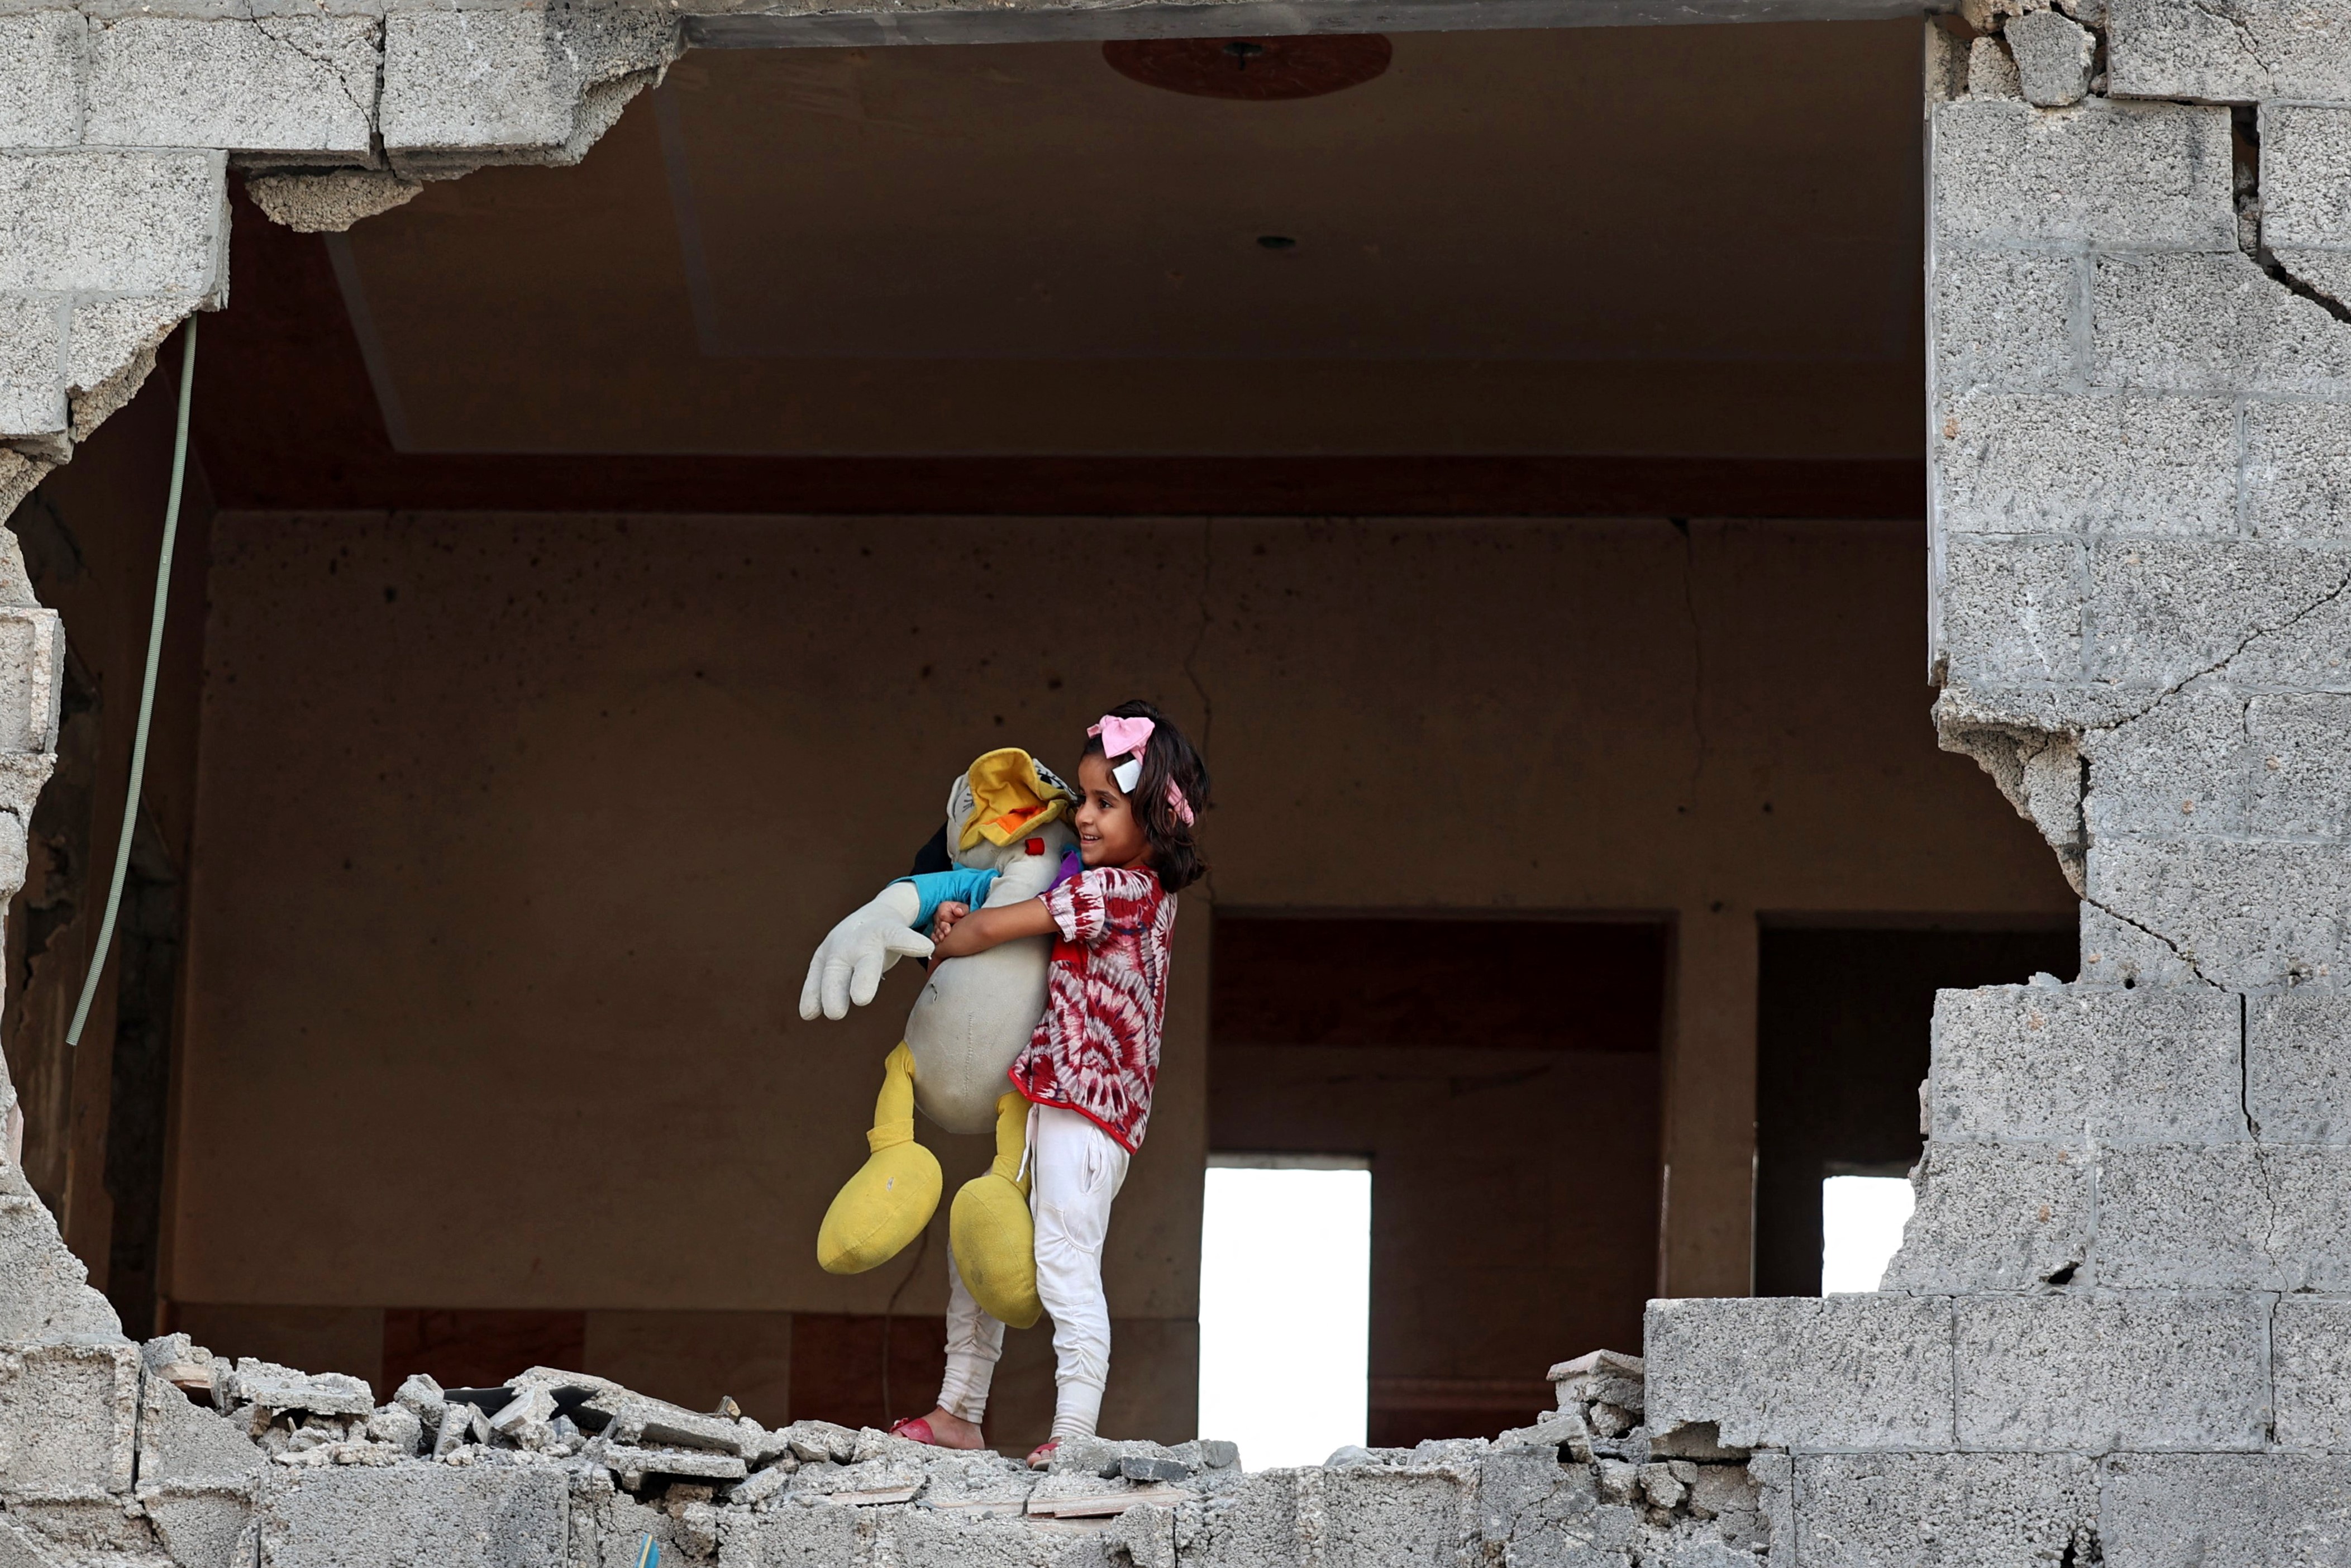 A Palestinian girl holds her doll inside her house which was heavily damaged during the latest Israeli-Palestinian fighting, in Gaza City on August 5, 2021.